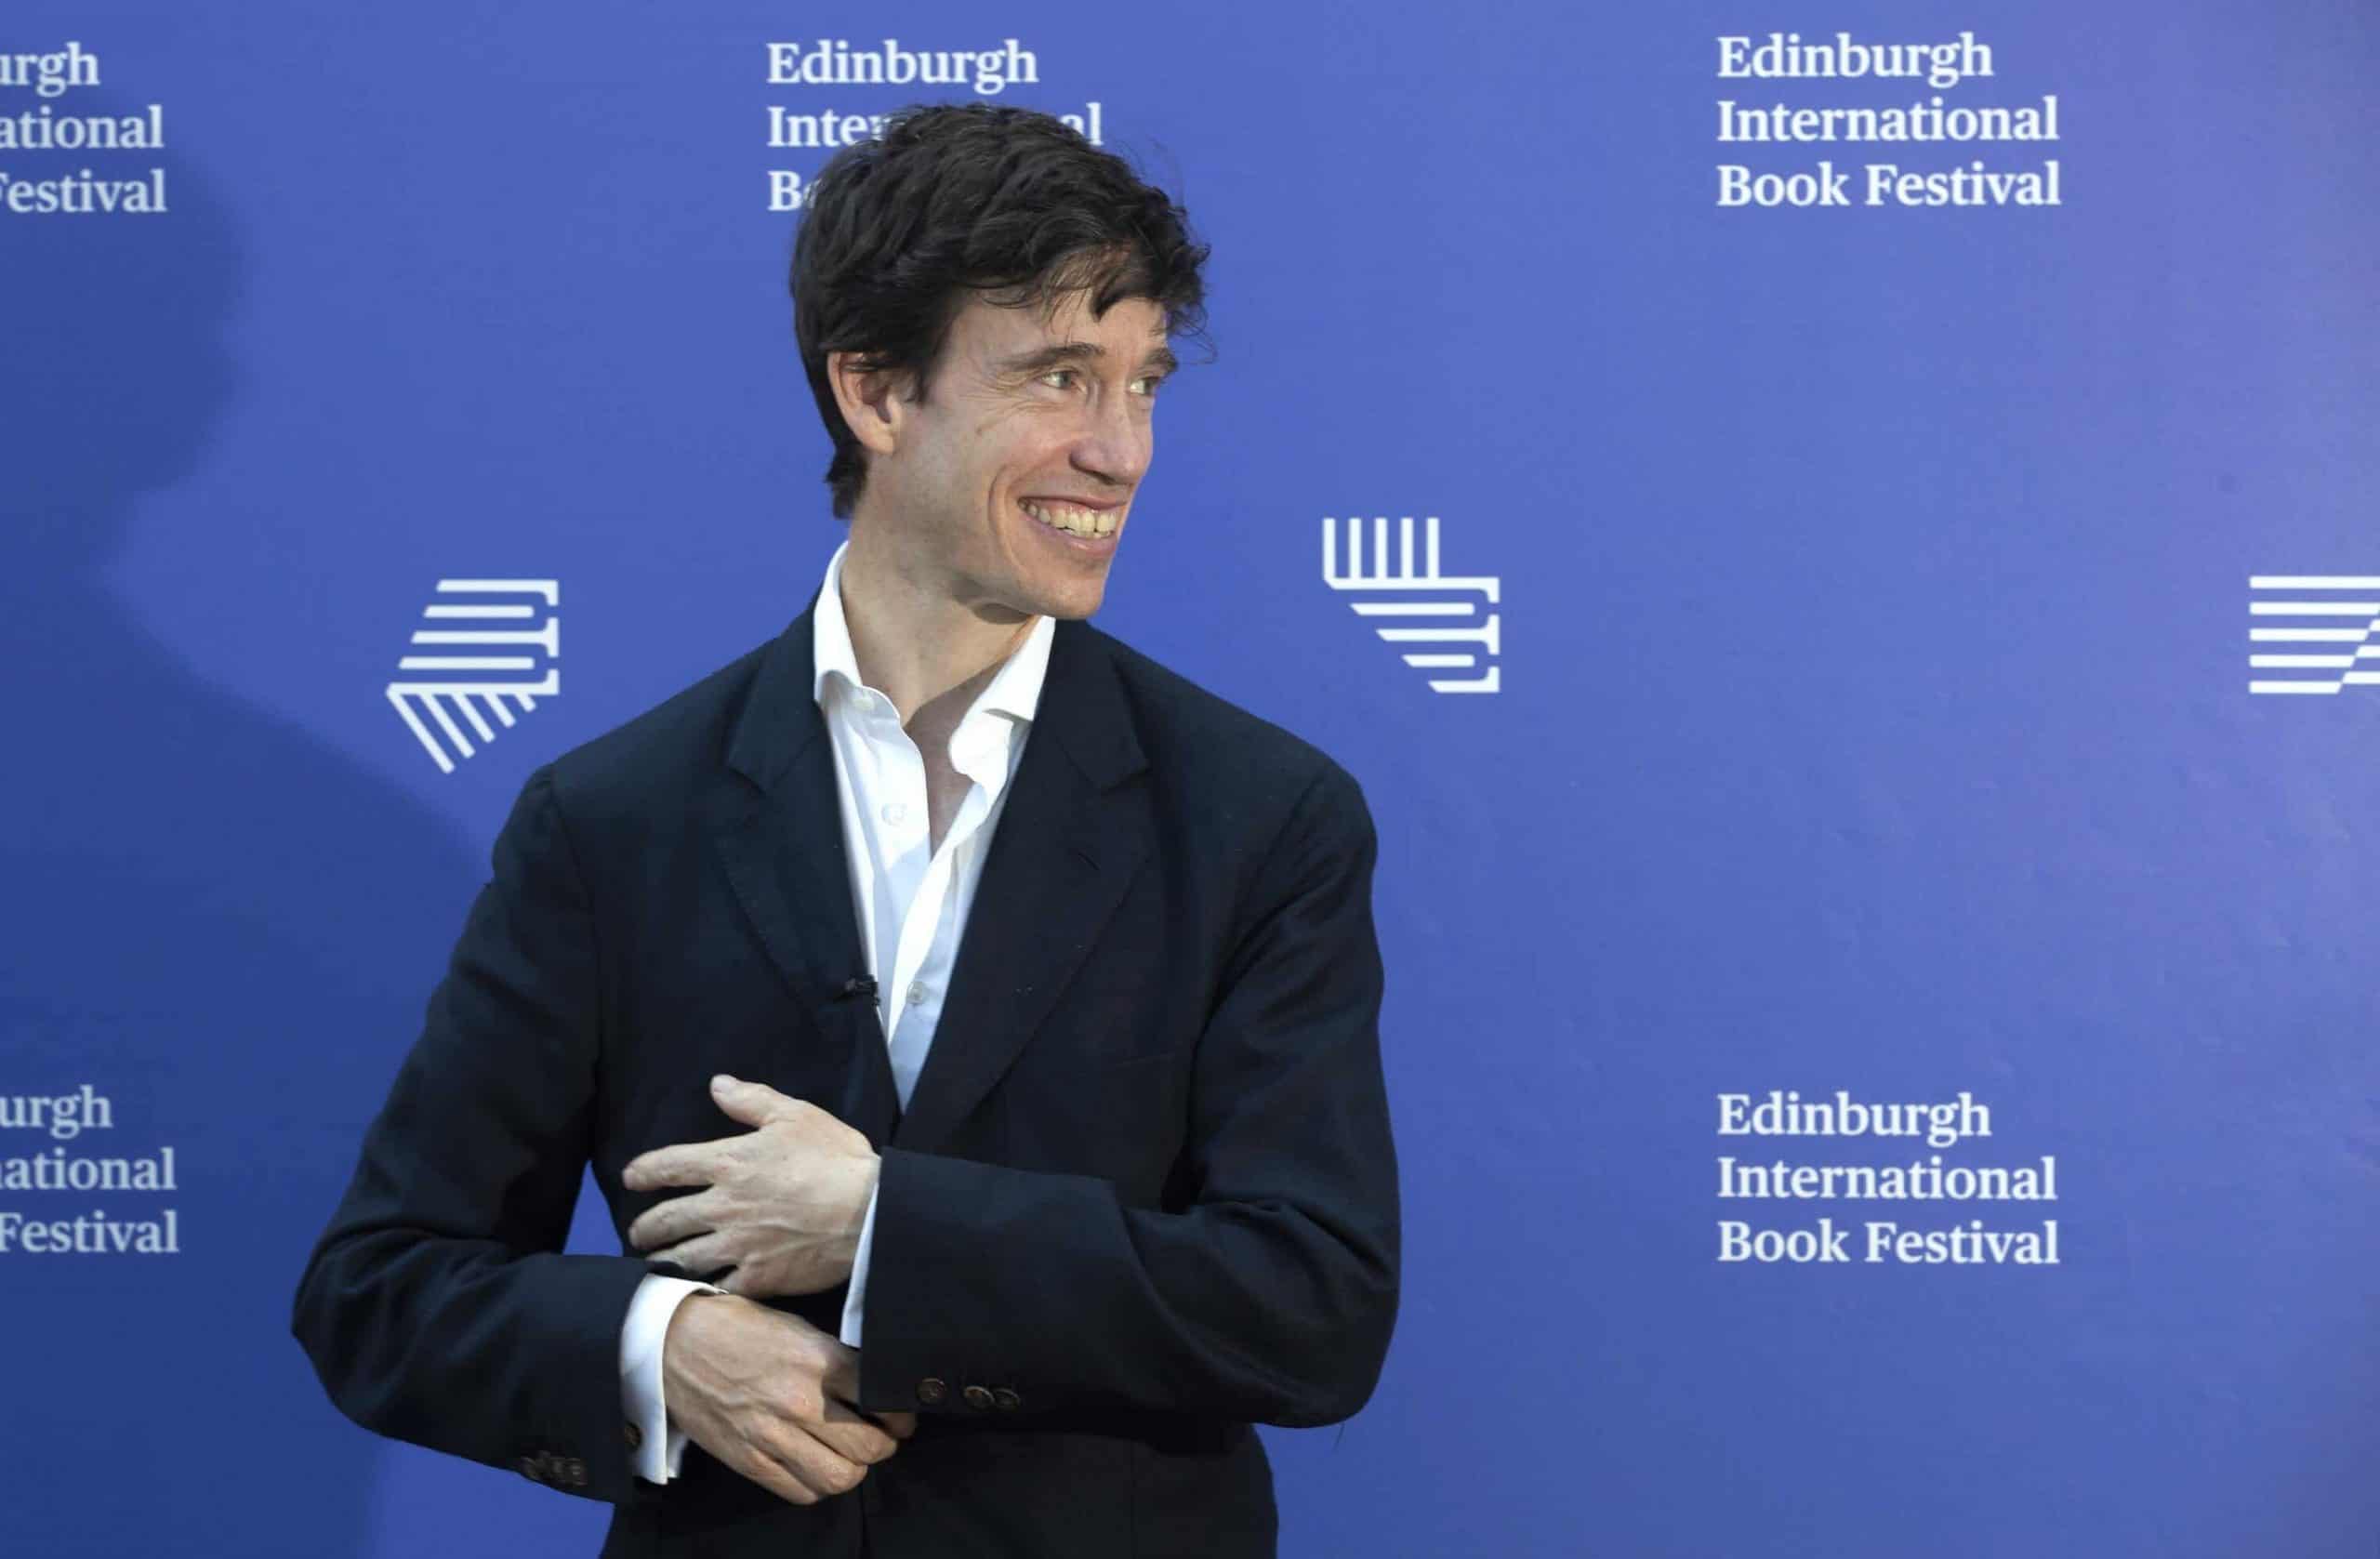 ‘Unsuited to be PM’: Rory Stewart’s devastating takedown of Boris Johnson goes viral